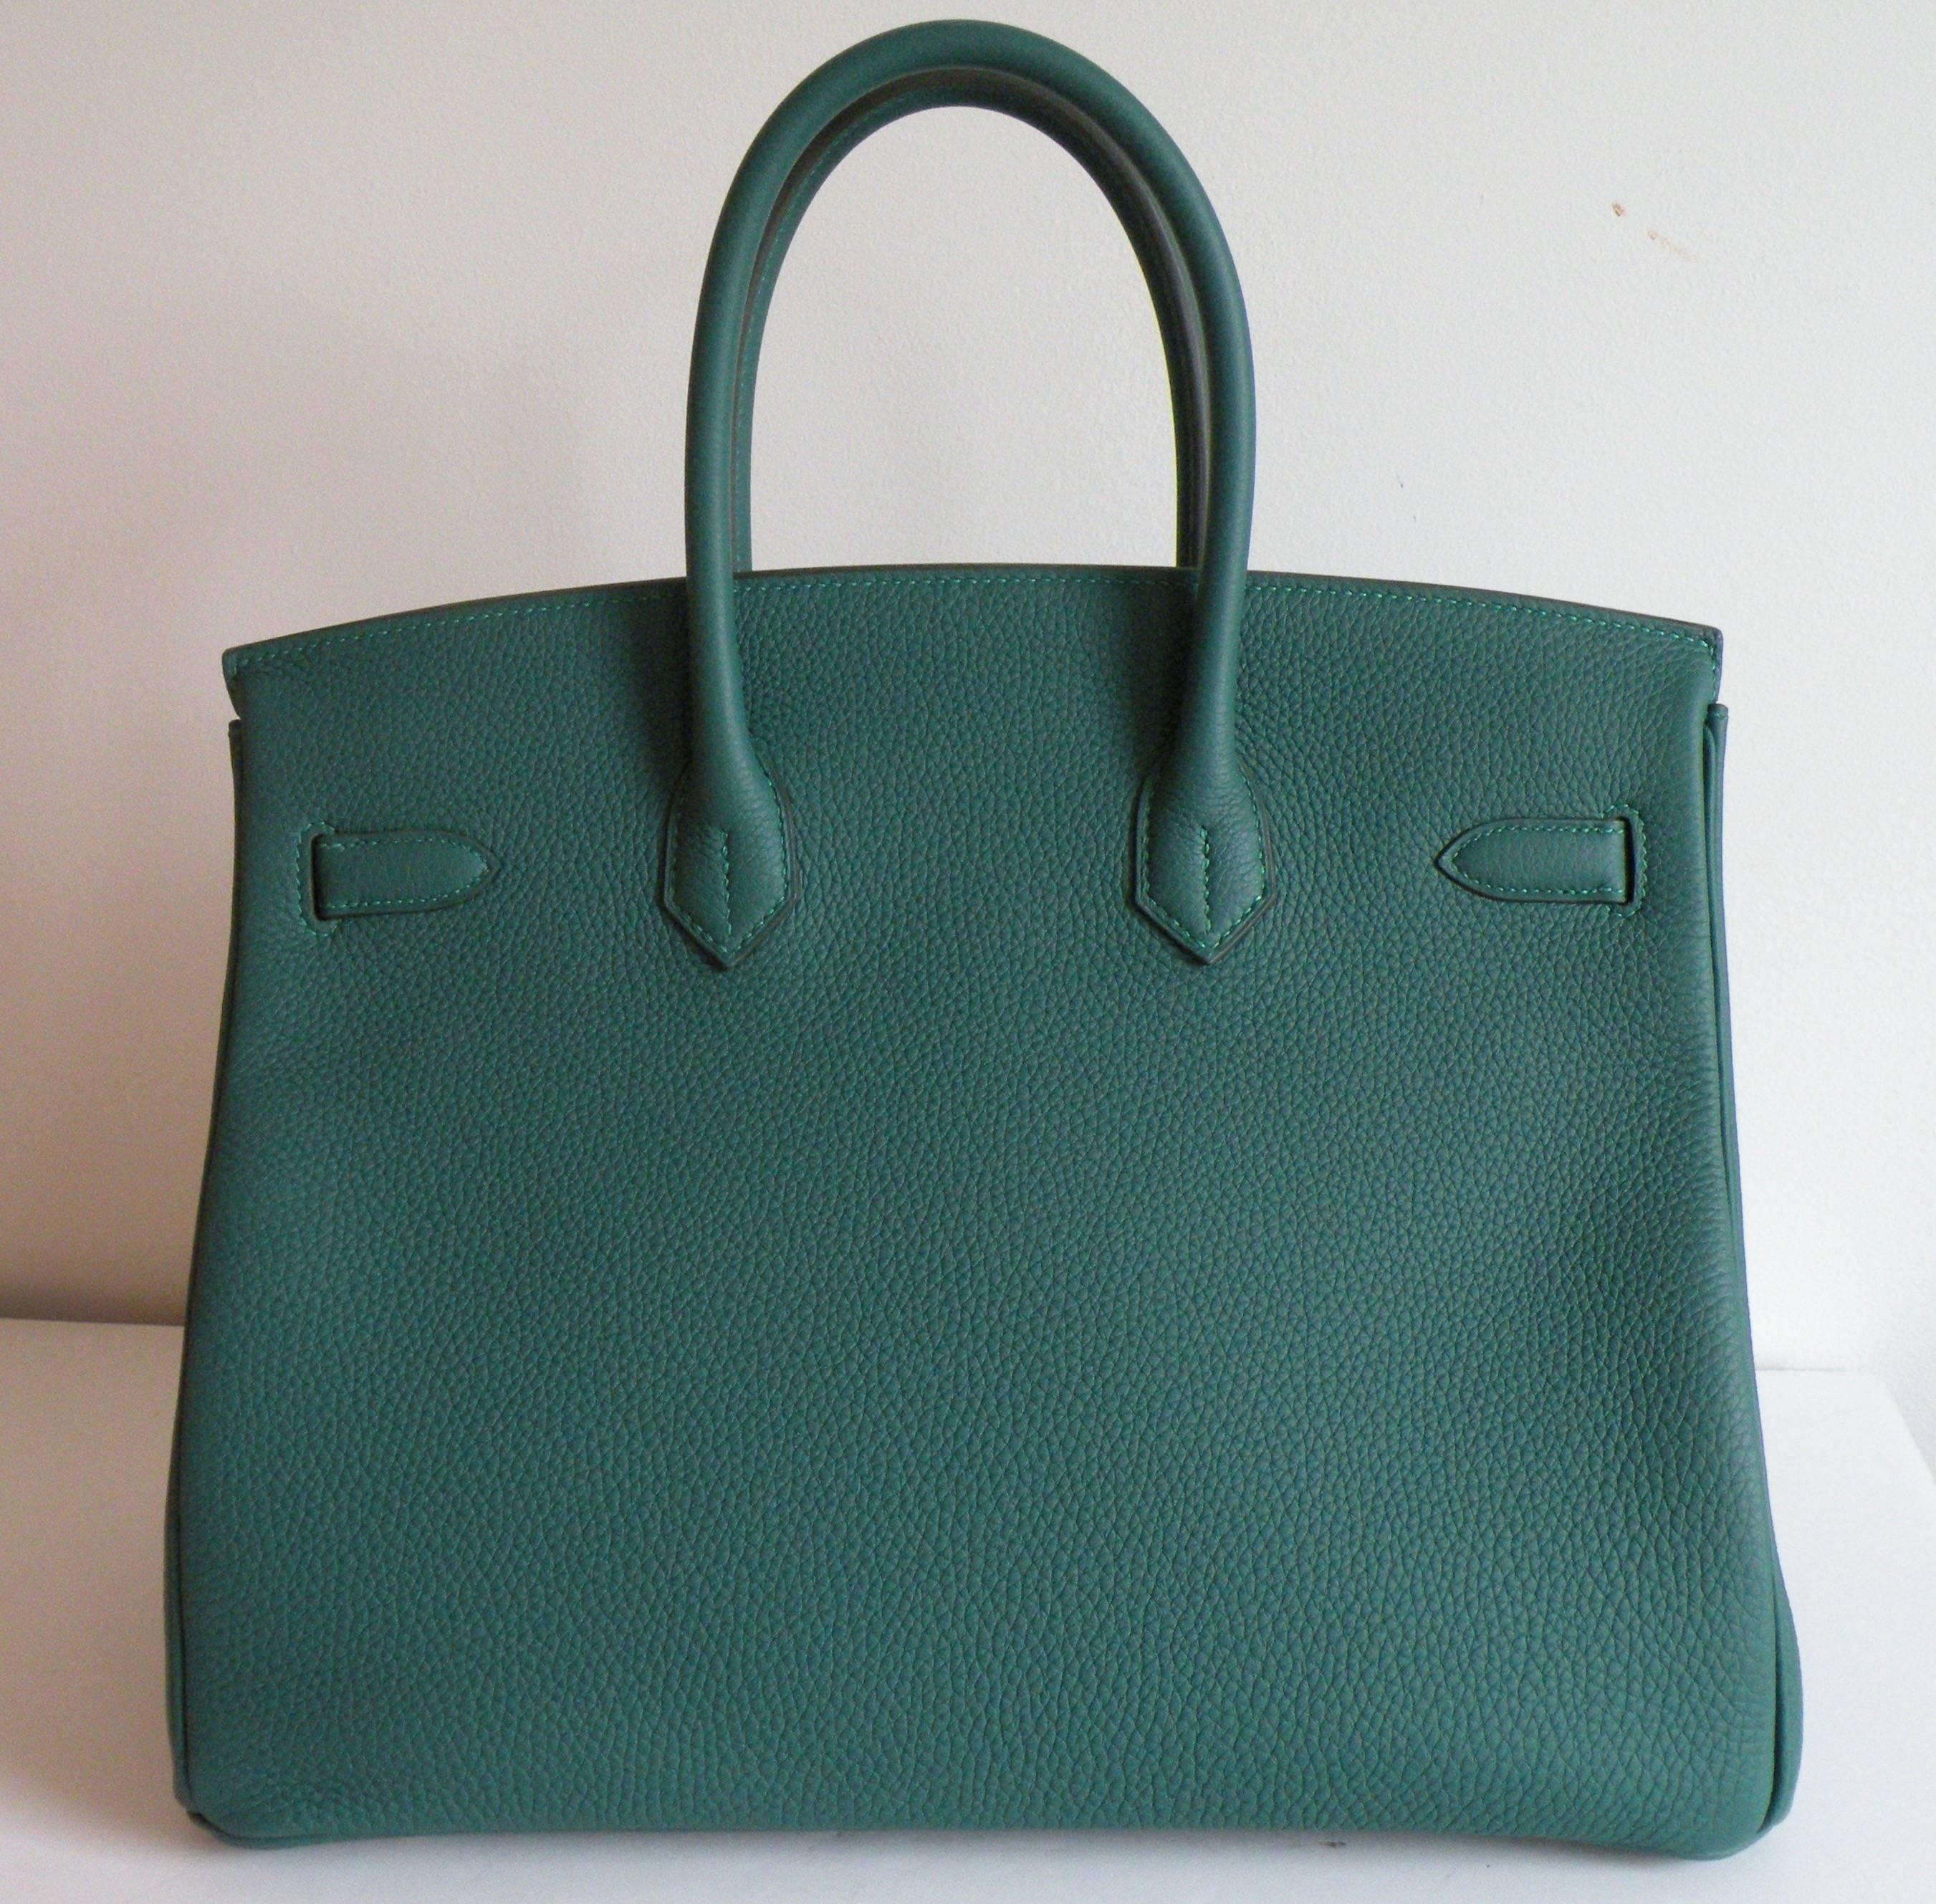 Hermes 35cm Birkin Bag 
The 35cm Birkin is Iconic
The name of the color is Malachite, a deep Emerald Green.
Done in Togo Leather and set with Gold Hardware
Amazing Combination
Brand New never carried
Plastic on the Hardware
Ready for gift